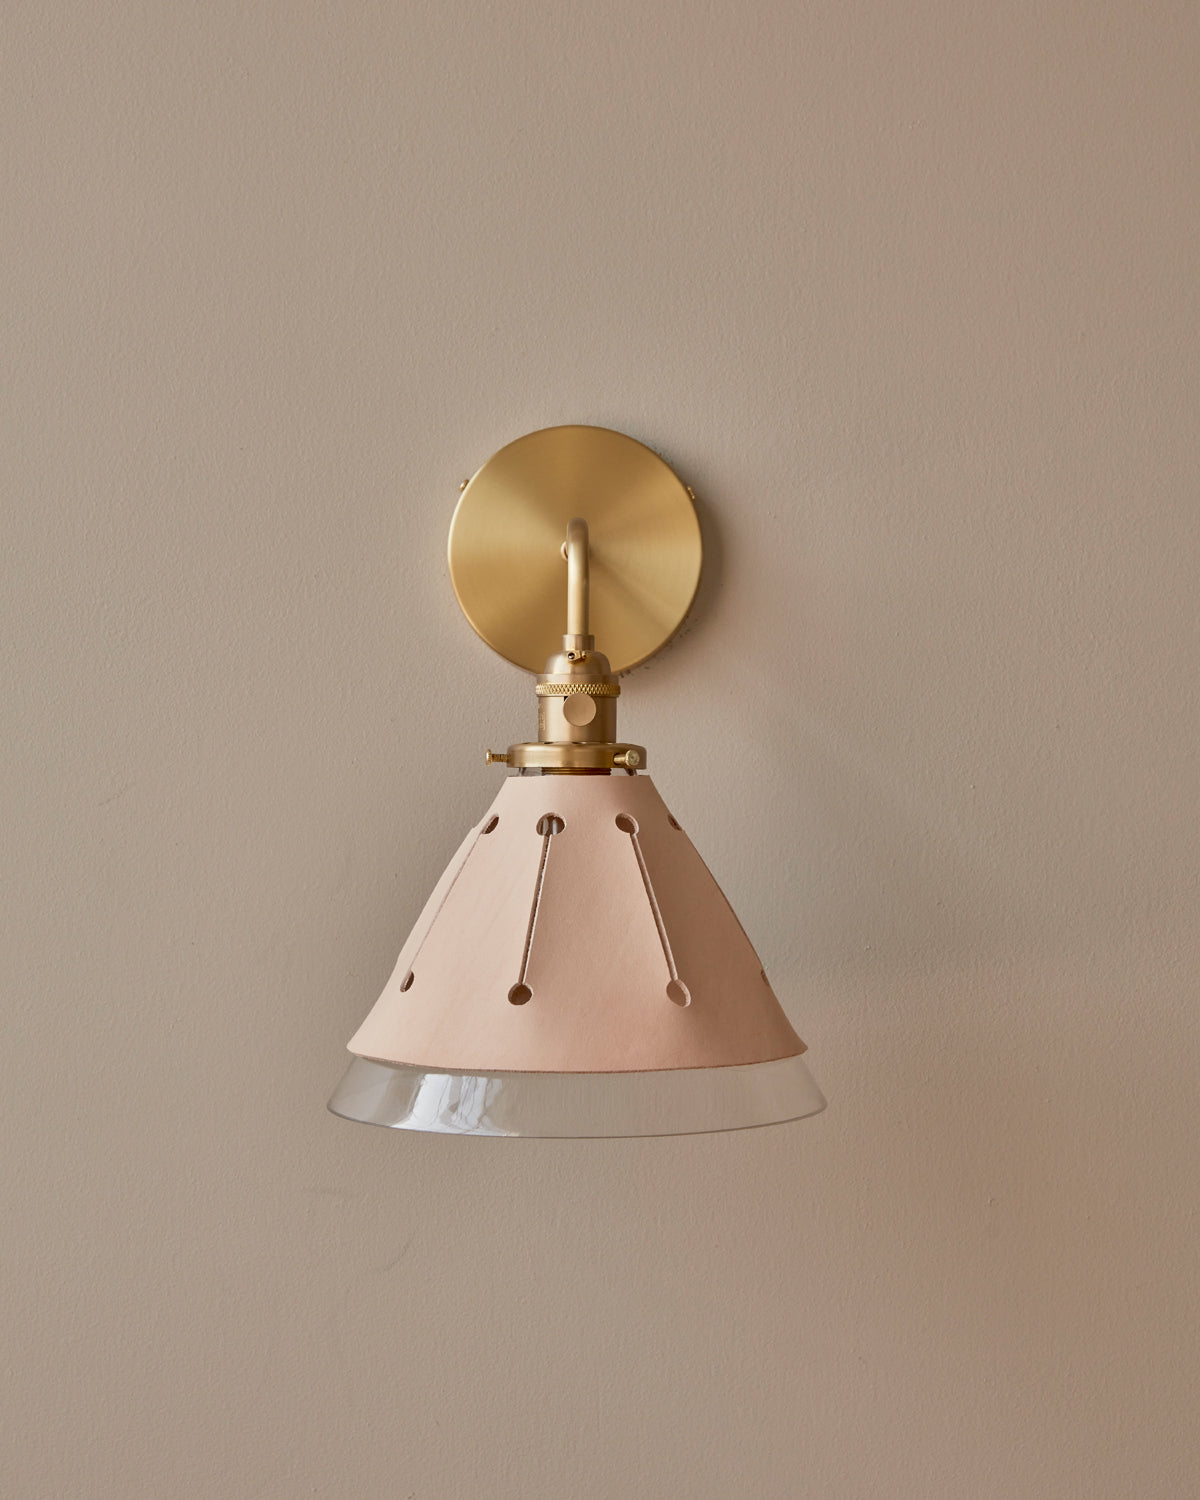 Classic hardwired satin brass wall sconce with cone glass diffuser and decorative handstitched leather shade